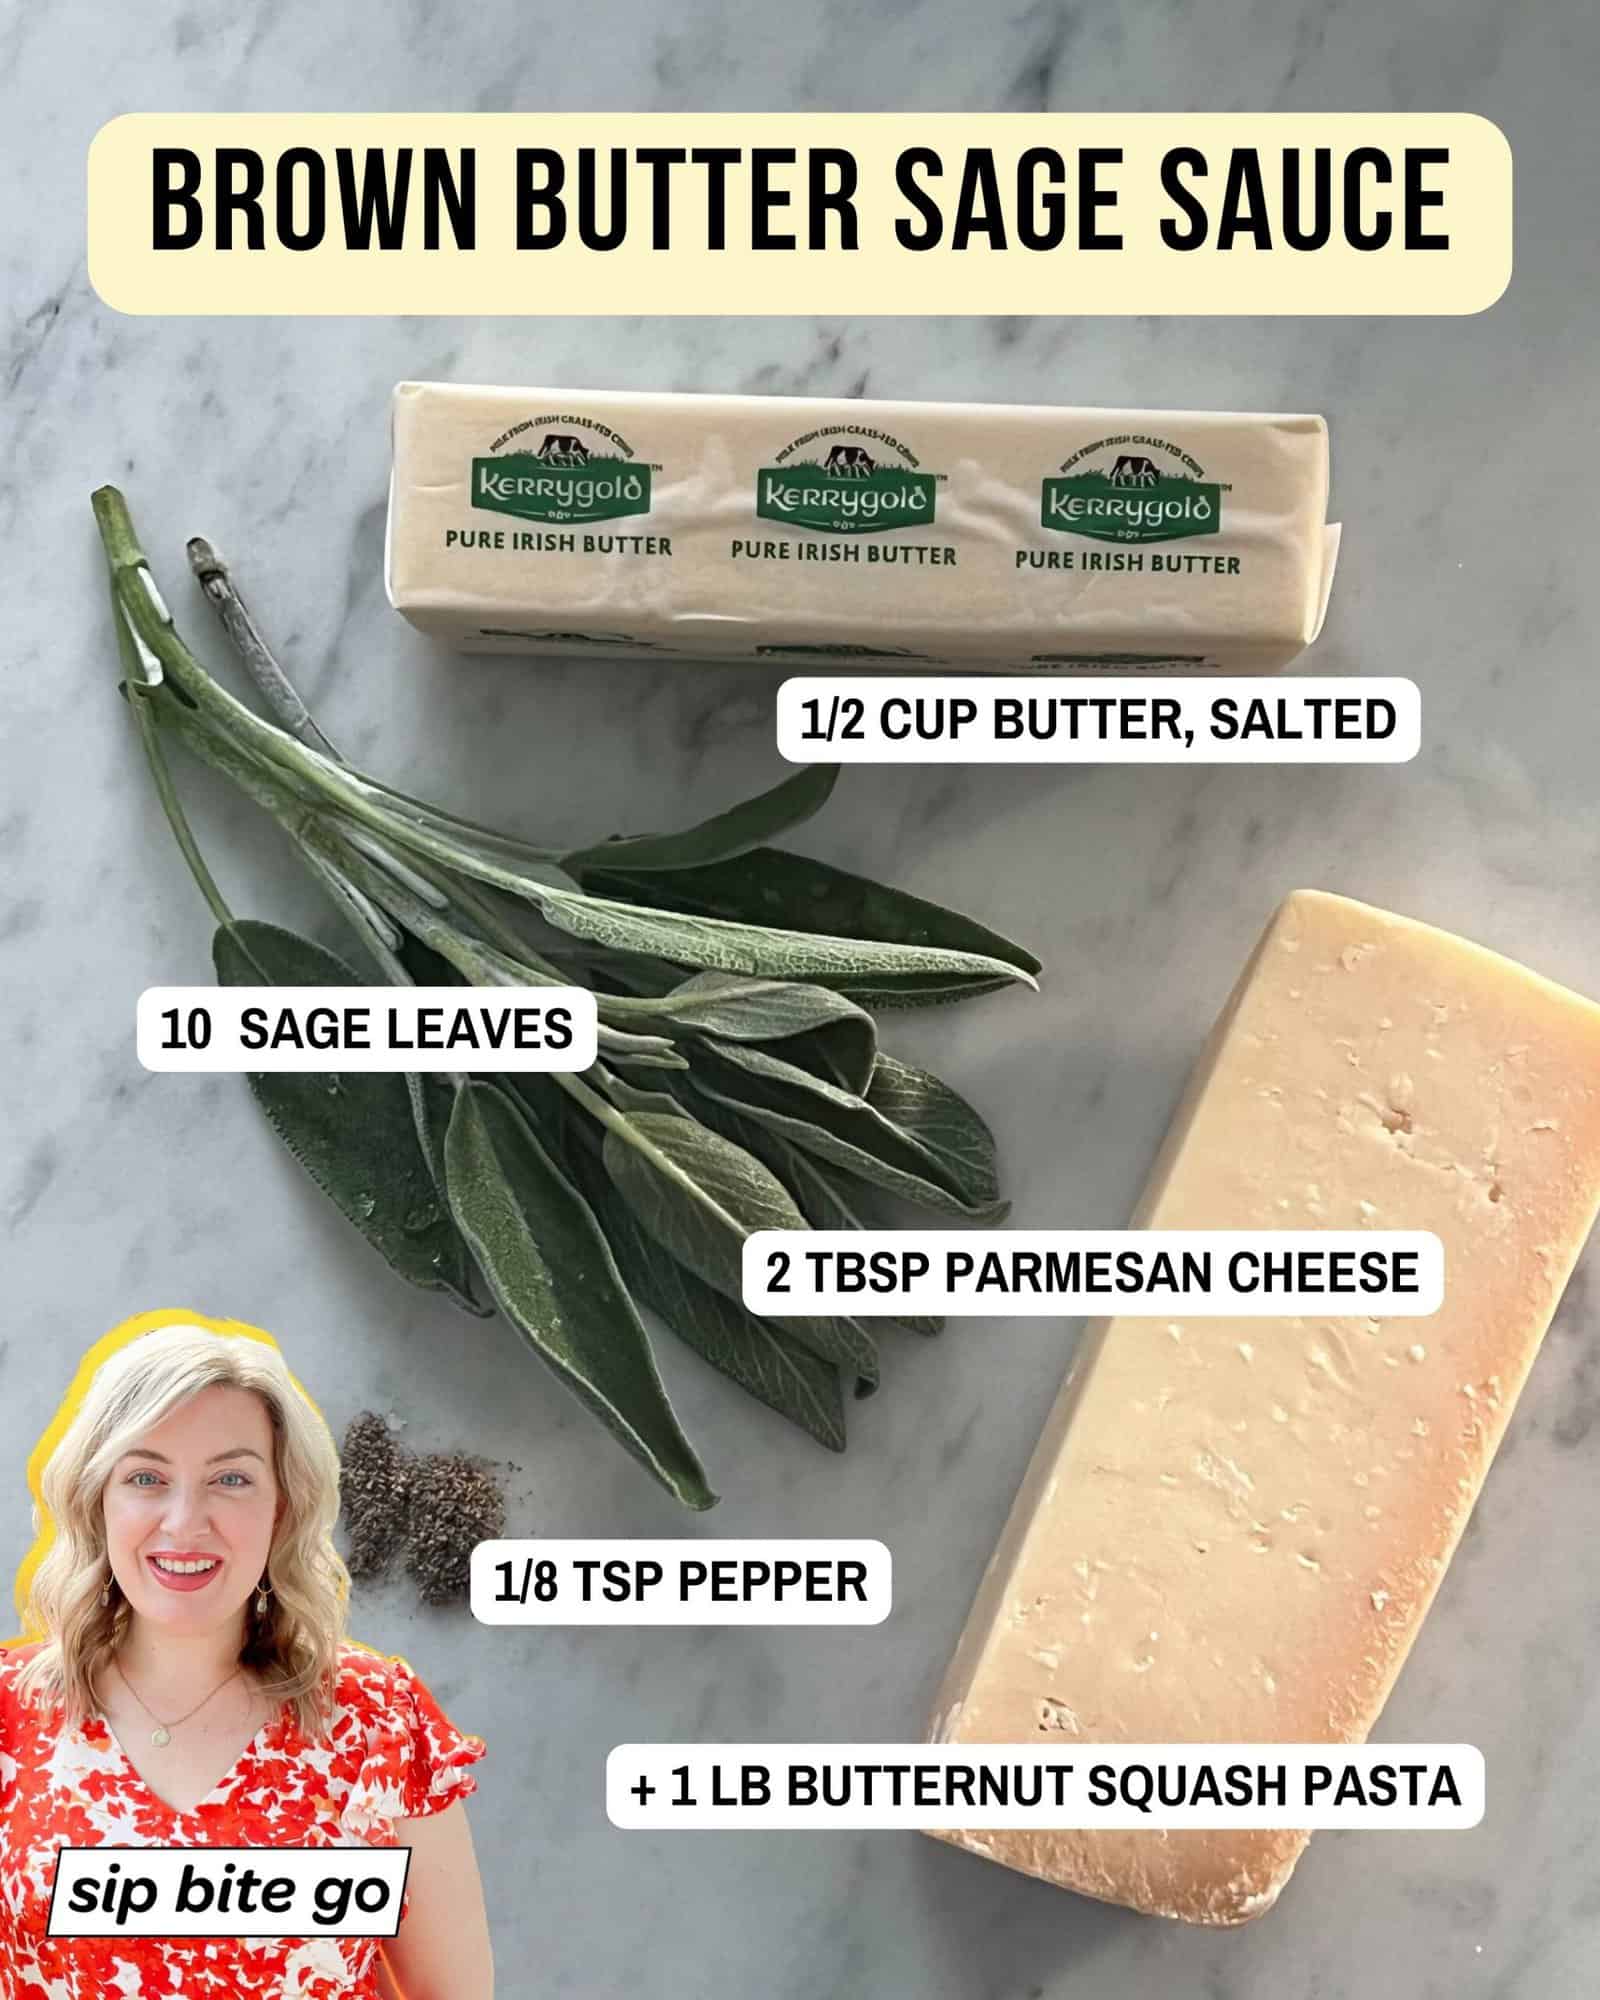 Infographic with Brown Butter Sage Sauce Ingredients with text captions and logo